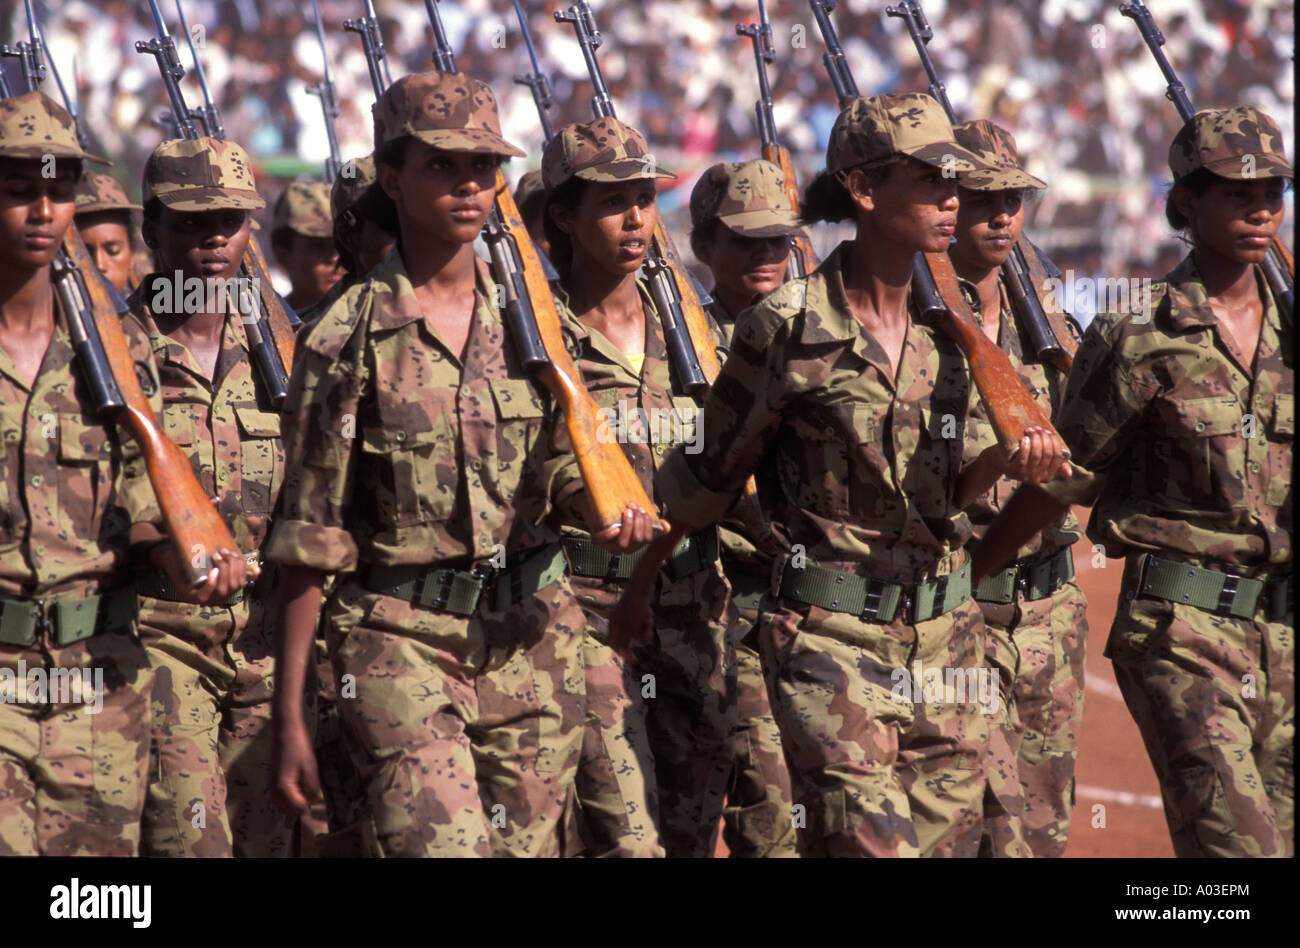 stock-image-of-eritrean-women-soldiers-marching-on-parade-and-in-camouflage-AEPM